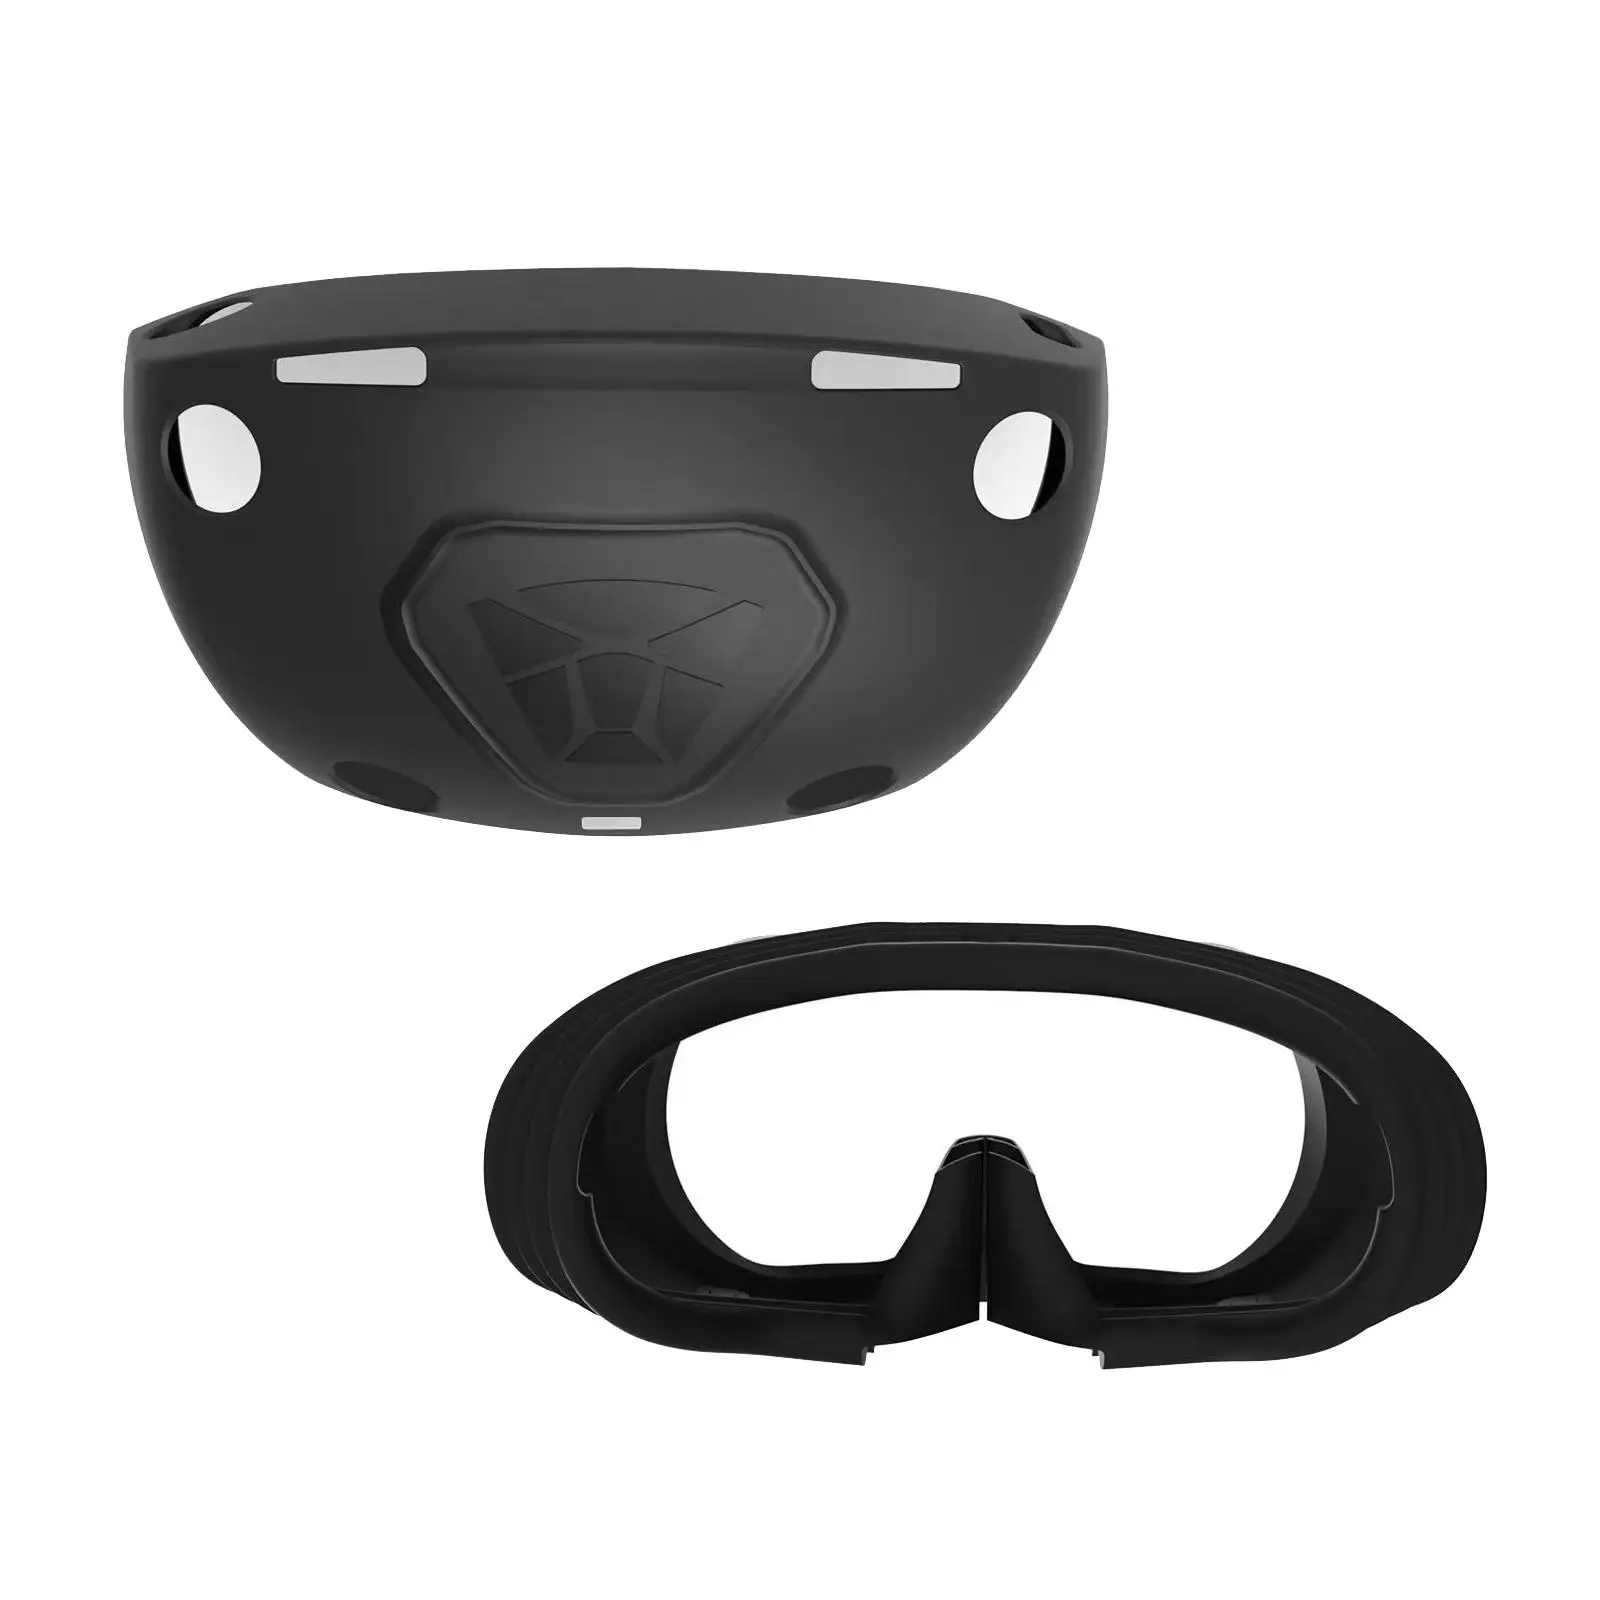 Silicone Protector Cover Sweatproof Dustproof Shockproof Anti Scratch Protective Cover Washable for VR2 Headsets Easy to Install